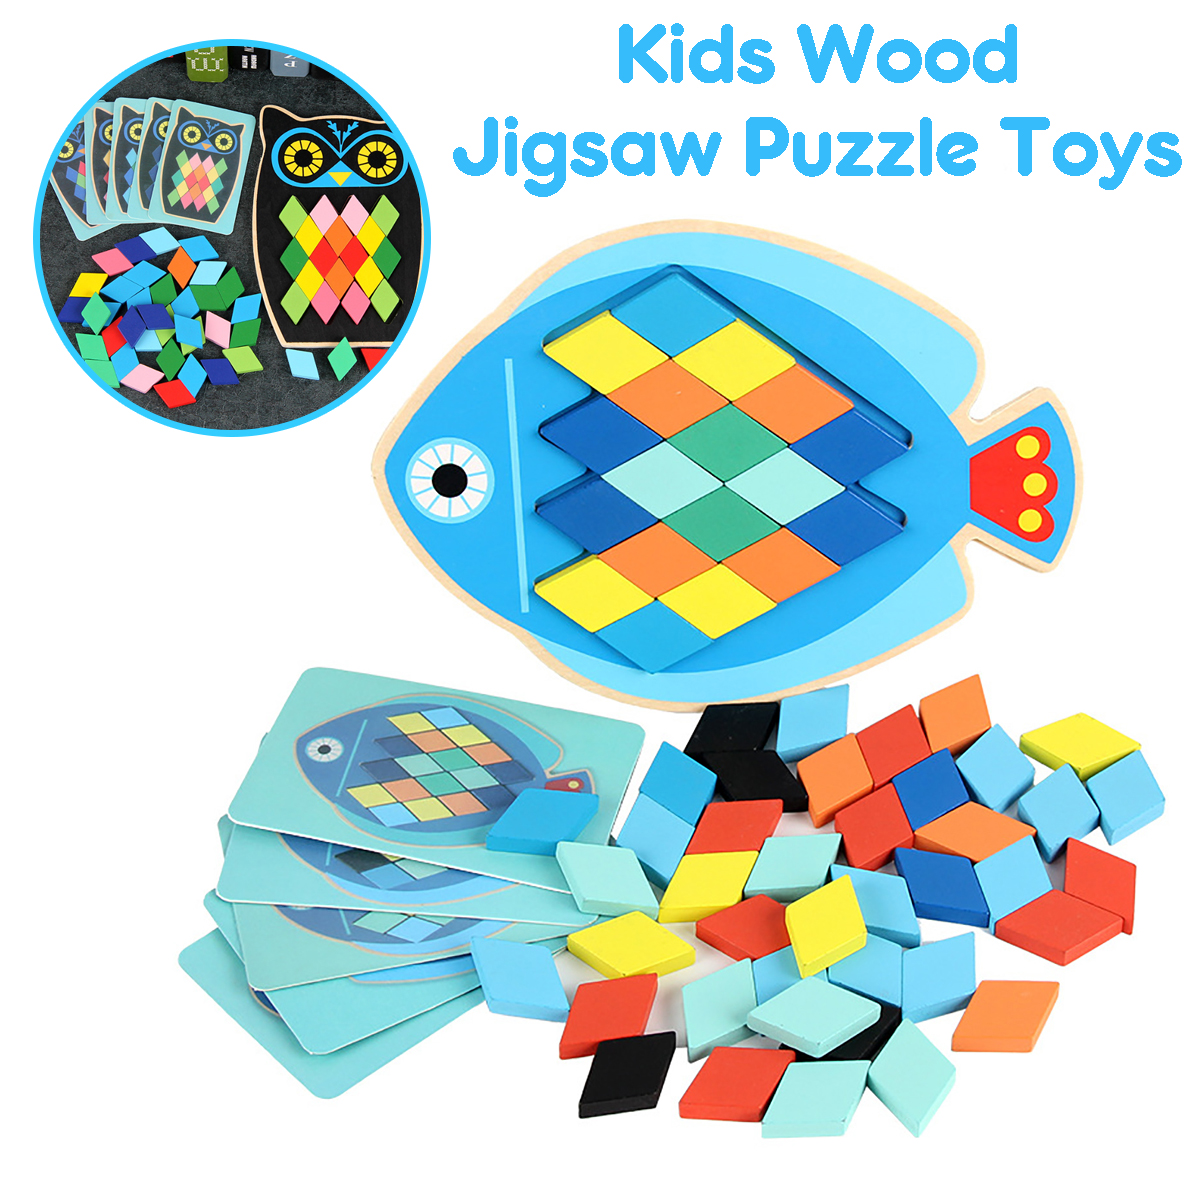 Wood-DIY-Assembly-Jigsaw-Puzzle-Toy-Colors-Shapes-Cartoon-Fish-Owl-Matching-Cards-Toy-for-Children-L-1682195-9